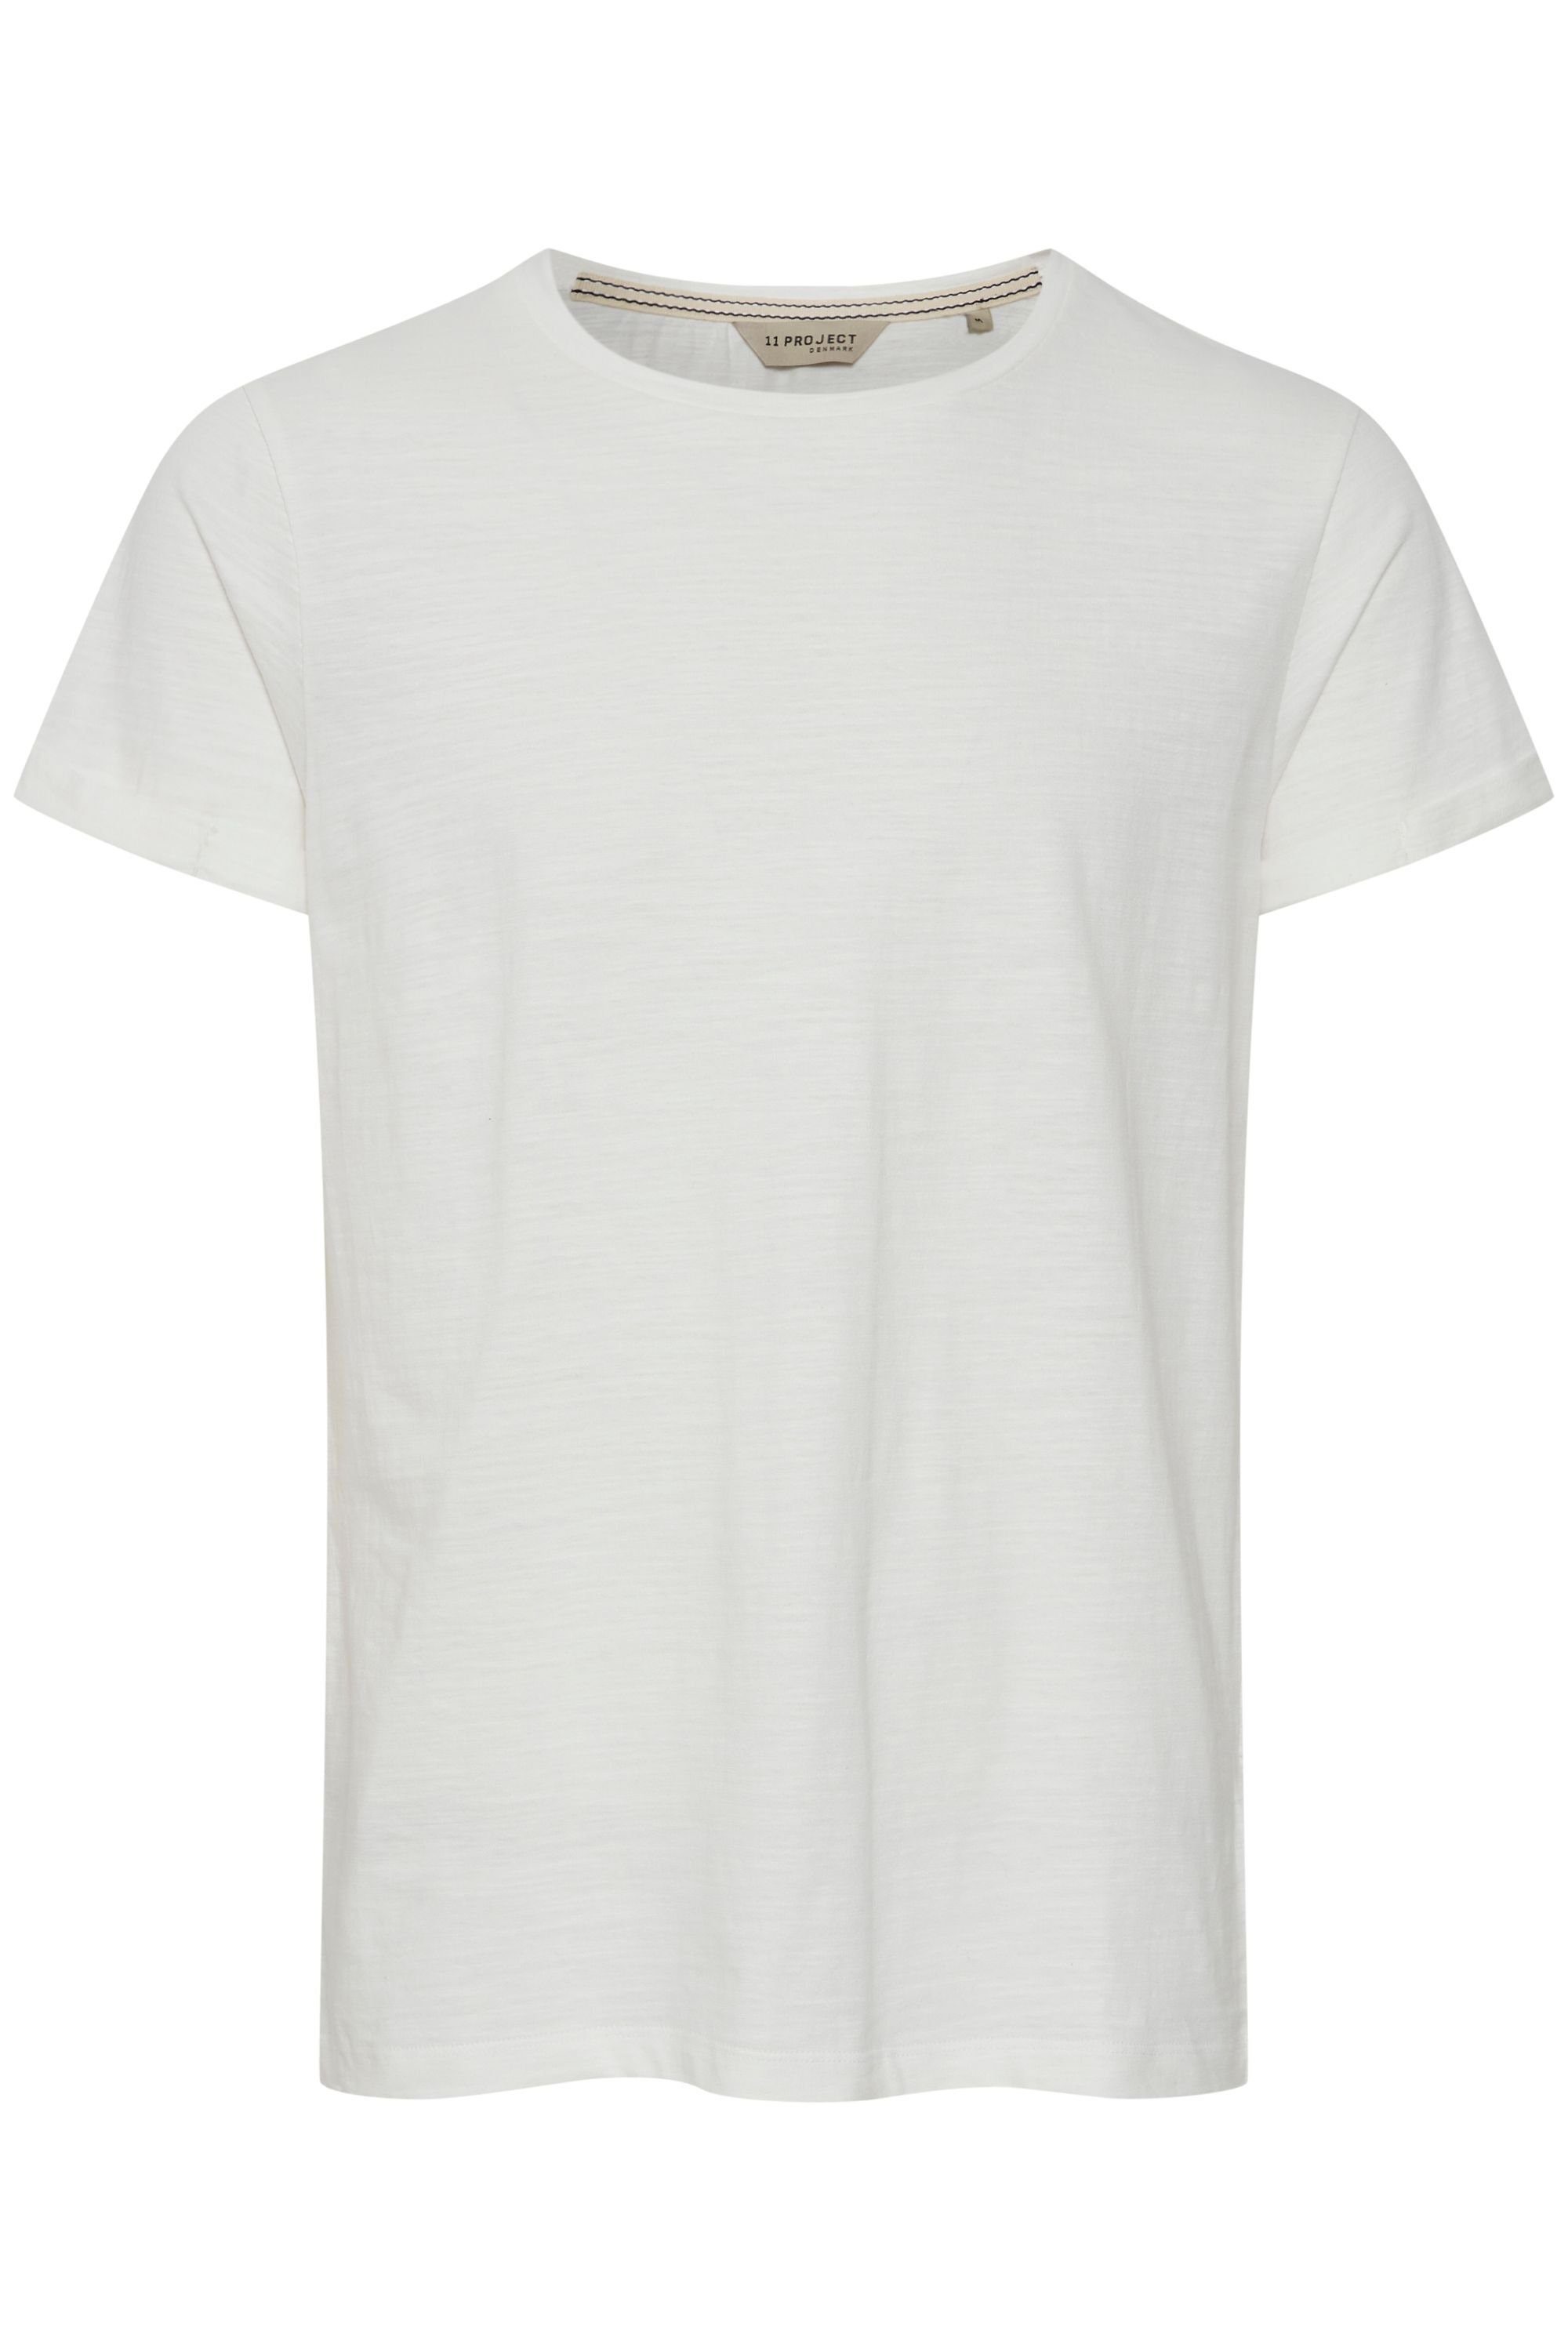 PRAiko 11 Project White 11 T-Shirt Snow Project